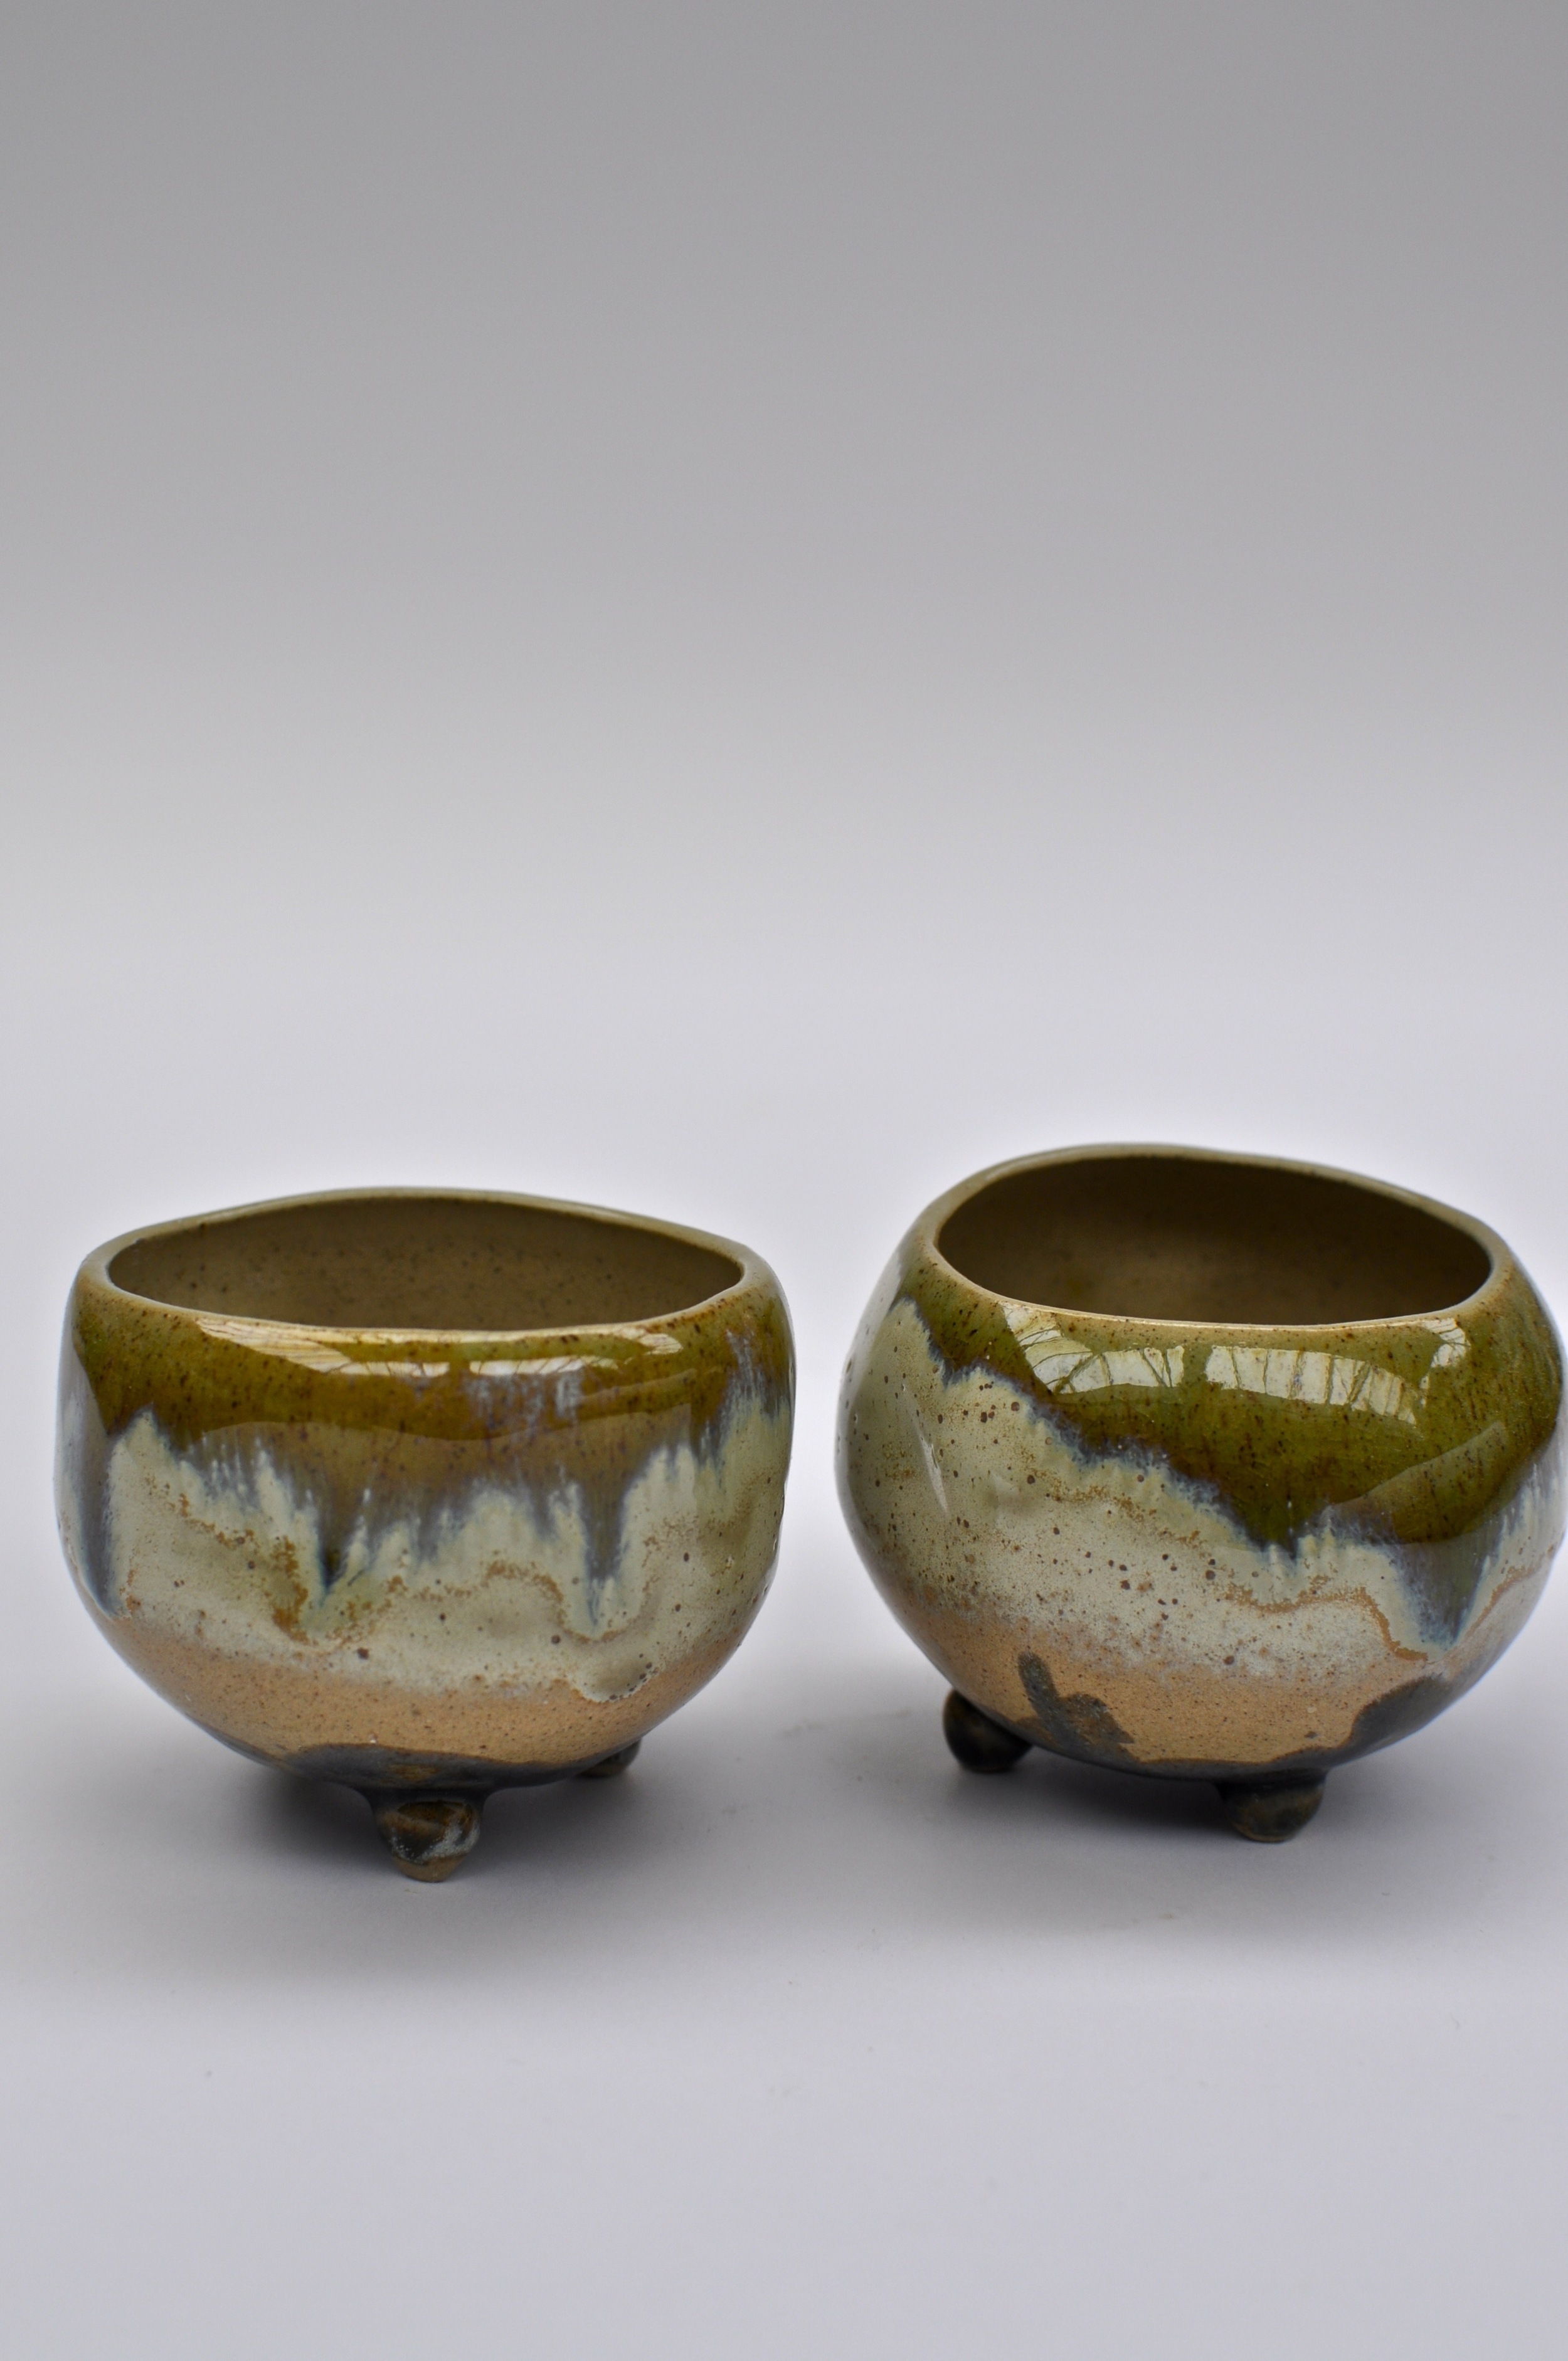 Warm and green toned tea bowls with tripod feet by Shannon May Mackenzie